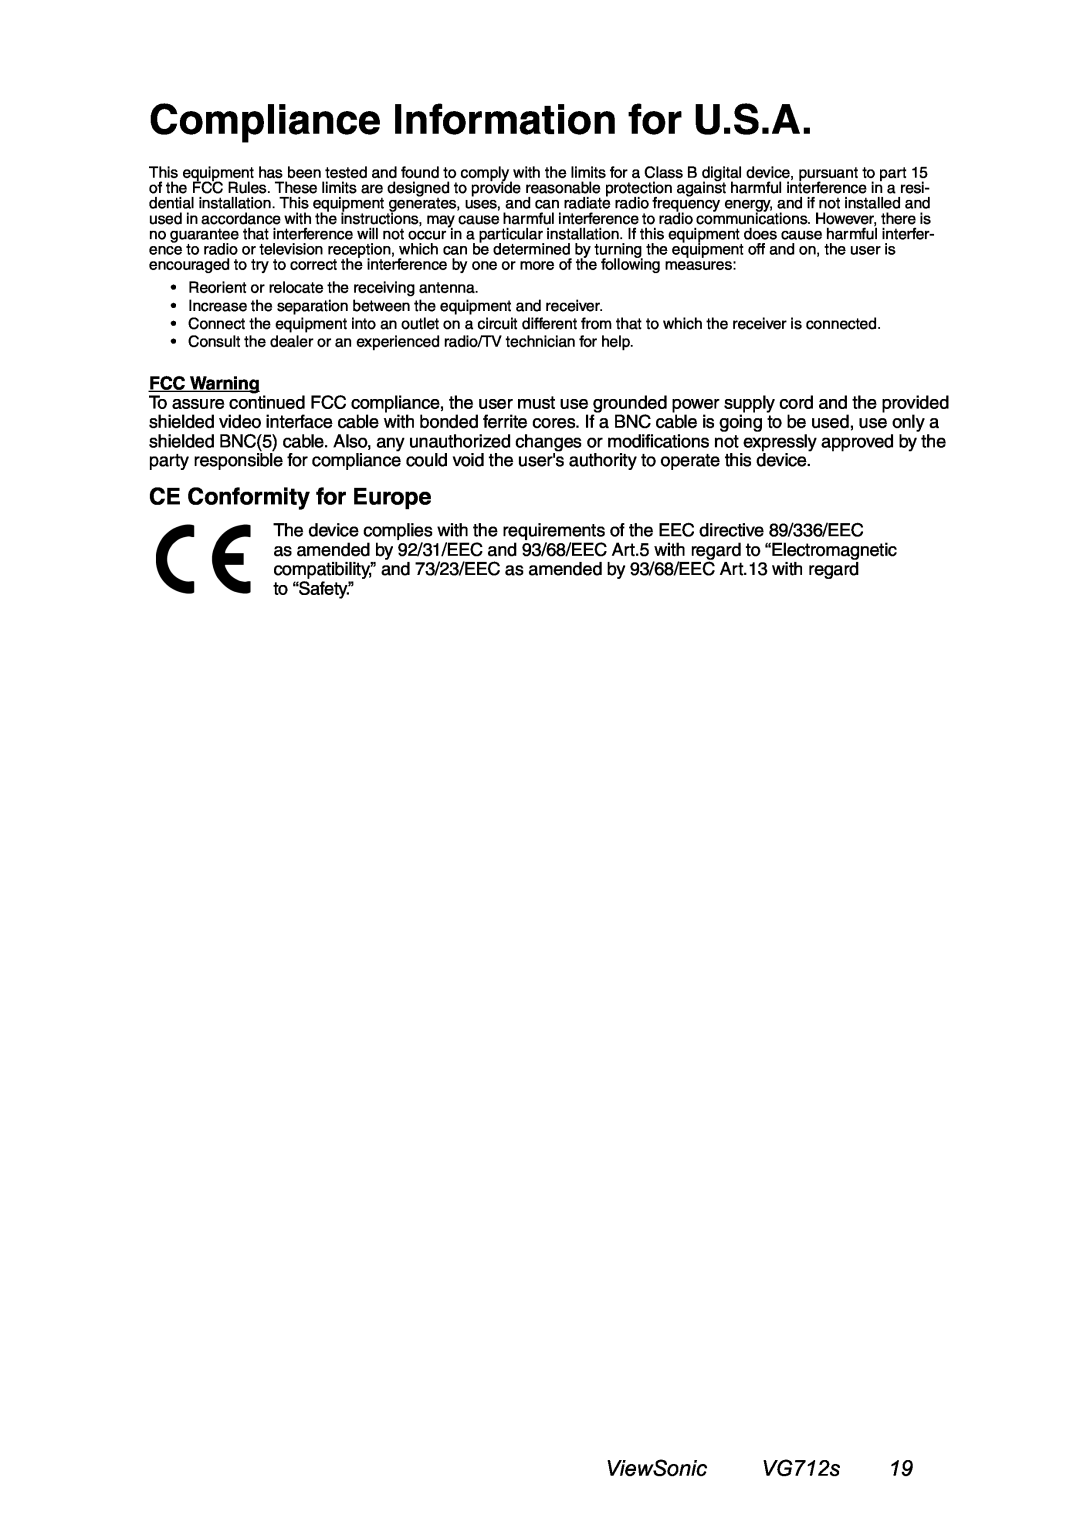 ViewSonic manual Compliance Information for U.S.A, CE Conformity for Europe, ViewSonic VG712s, FCC Warning 